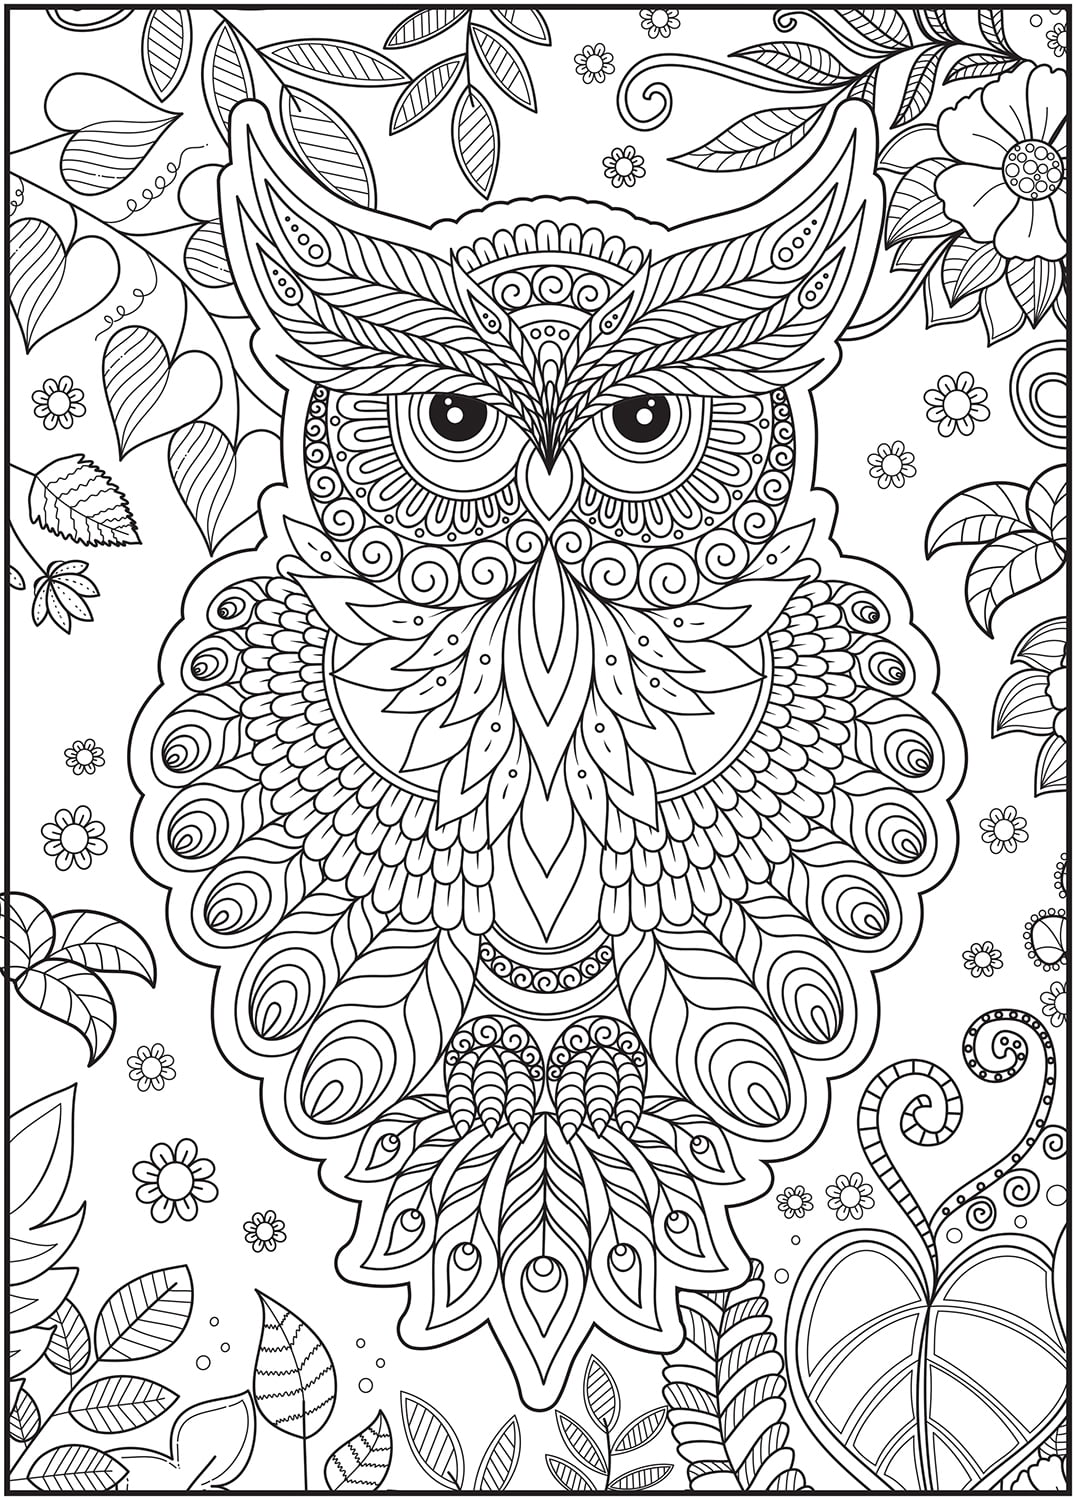 Dream-Core Collection Coloring Book: by Jess 316, Crafty